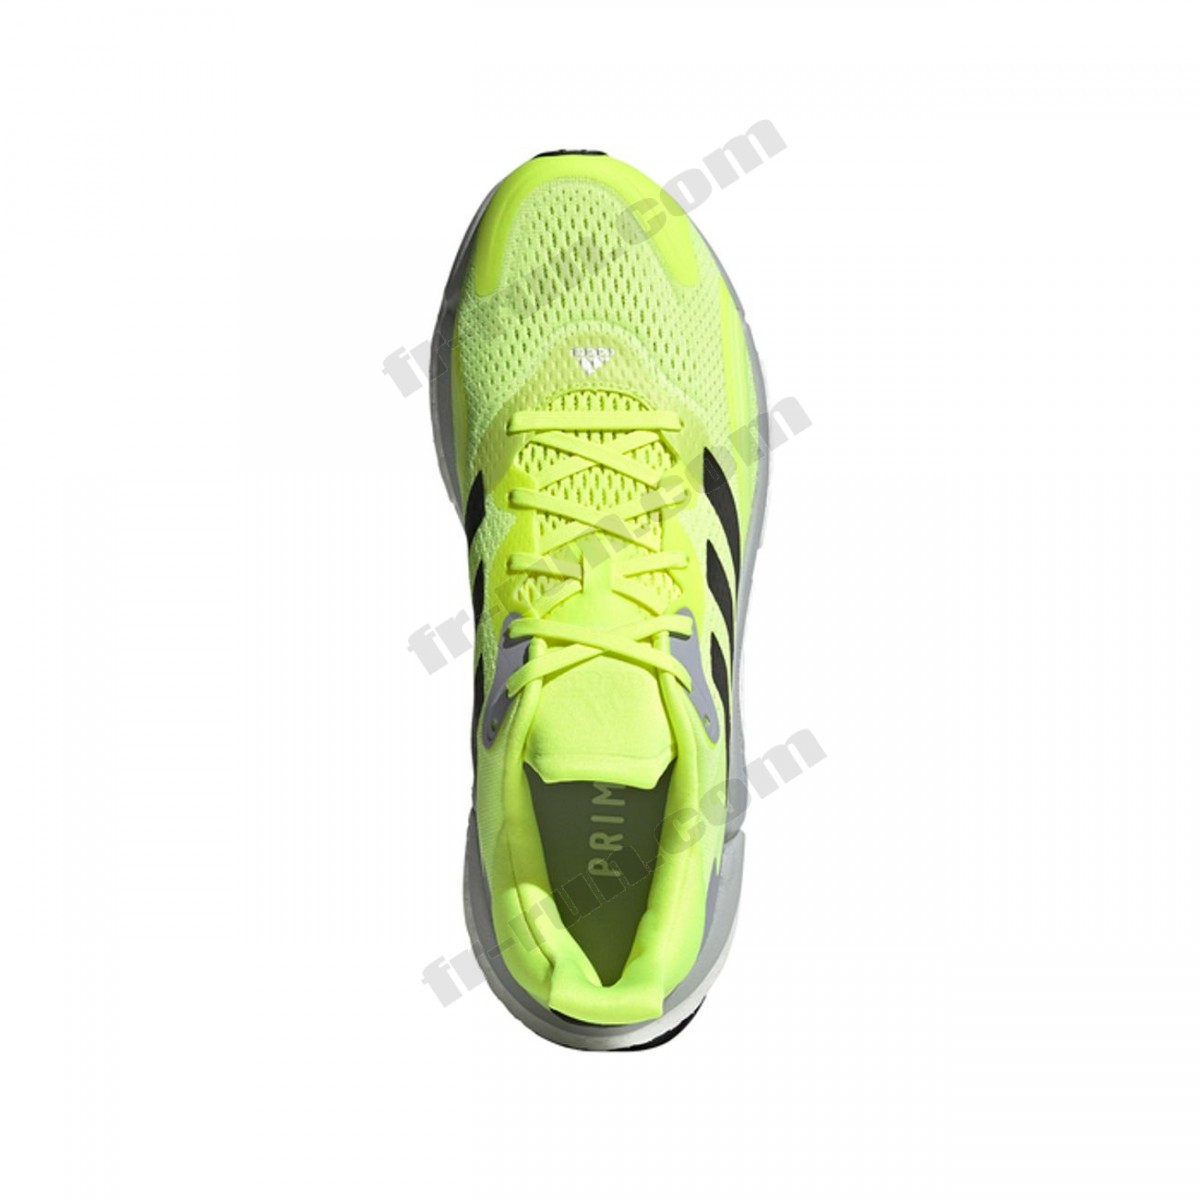 Adidas/CHAUSSURES BASSES running homme ADIDAS SOLAR BOOST 21 M √ Nouveau style √ Soldes - -2